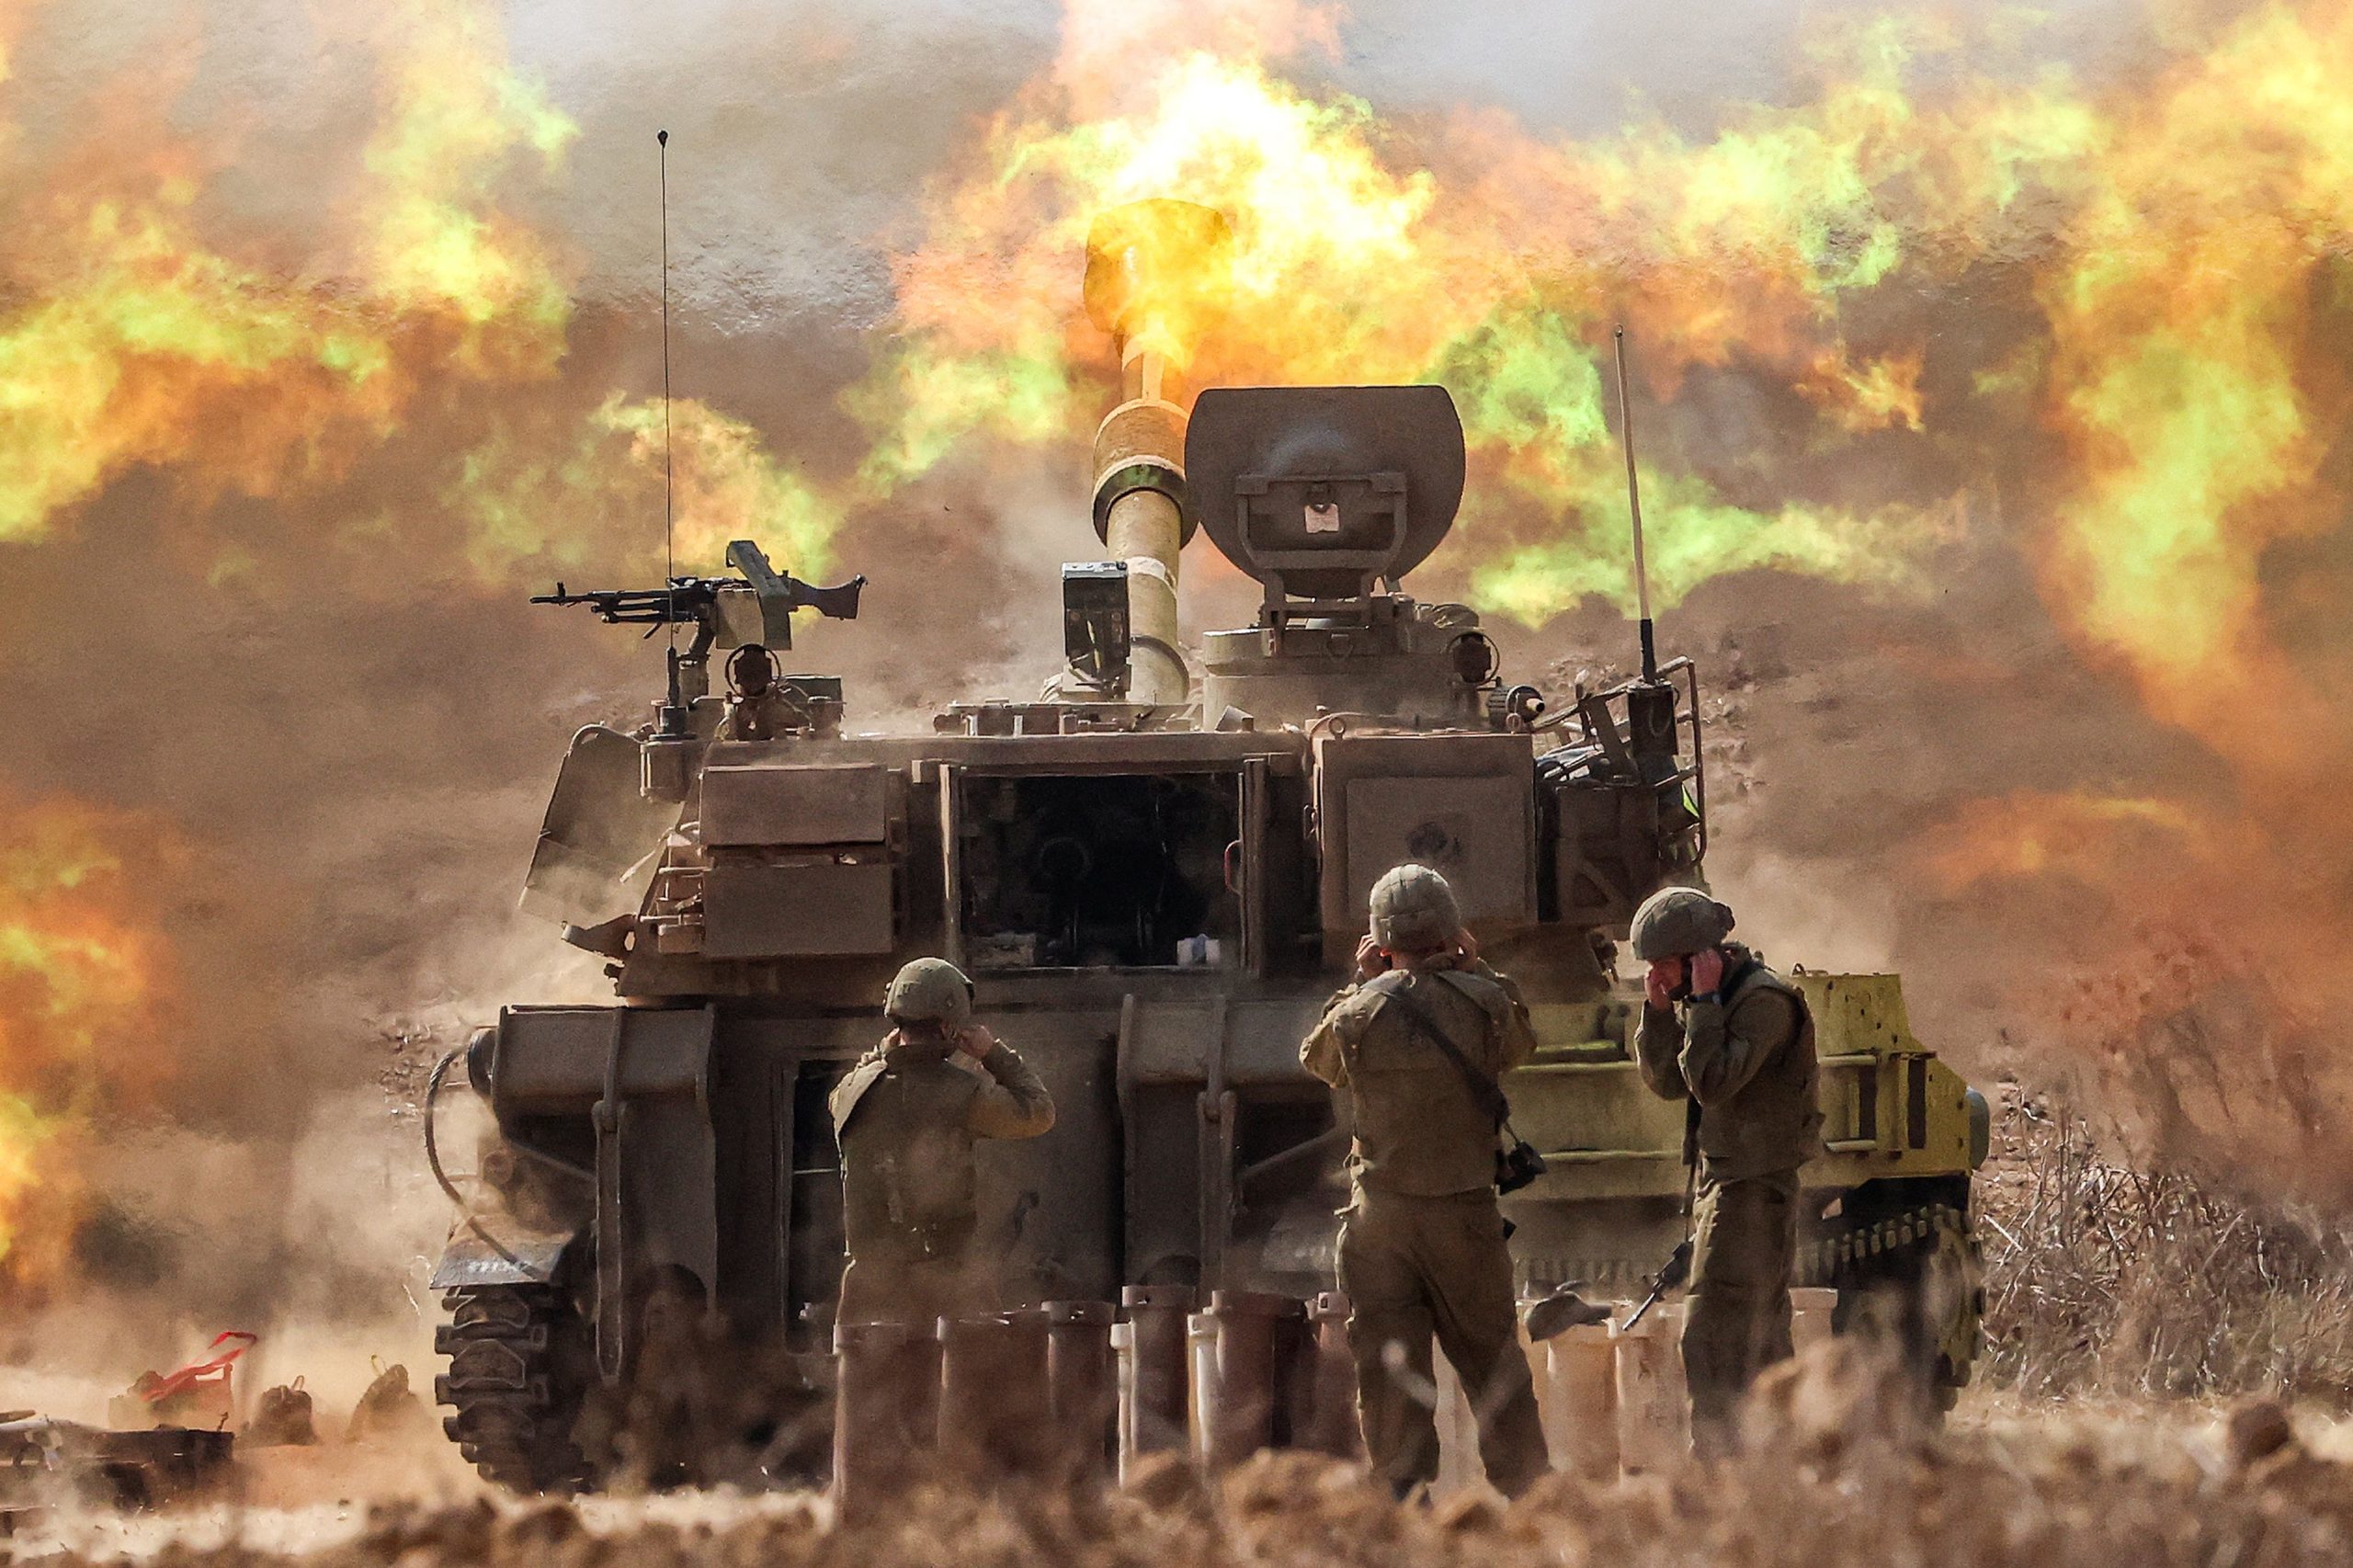 TOPSHOT - An Israeli army M109 155mm self-propelled howitzer fires rounds near the border with Gaza in southern Israel on October 11, 2023. Israel declared war on Hamas on October 8 following a shock land, air, and sea assault by the Gaza-based militant group. The death toll in Israel has surged above 1,200 following the worst attack in the country's 75-year history, while Gaza officials have reported 1000 people killed so far. 